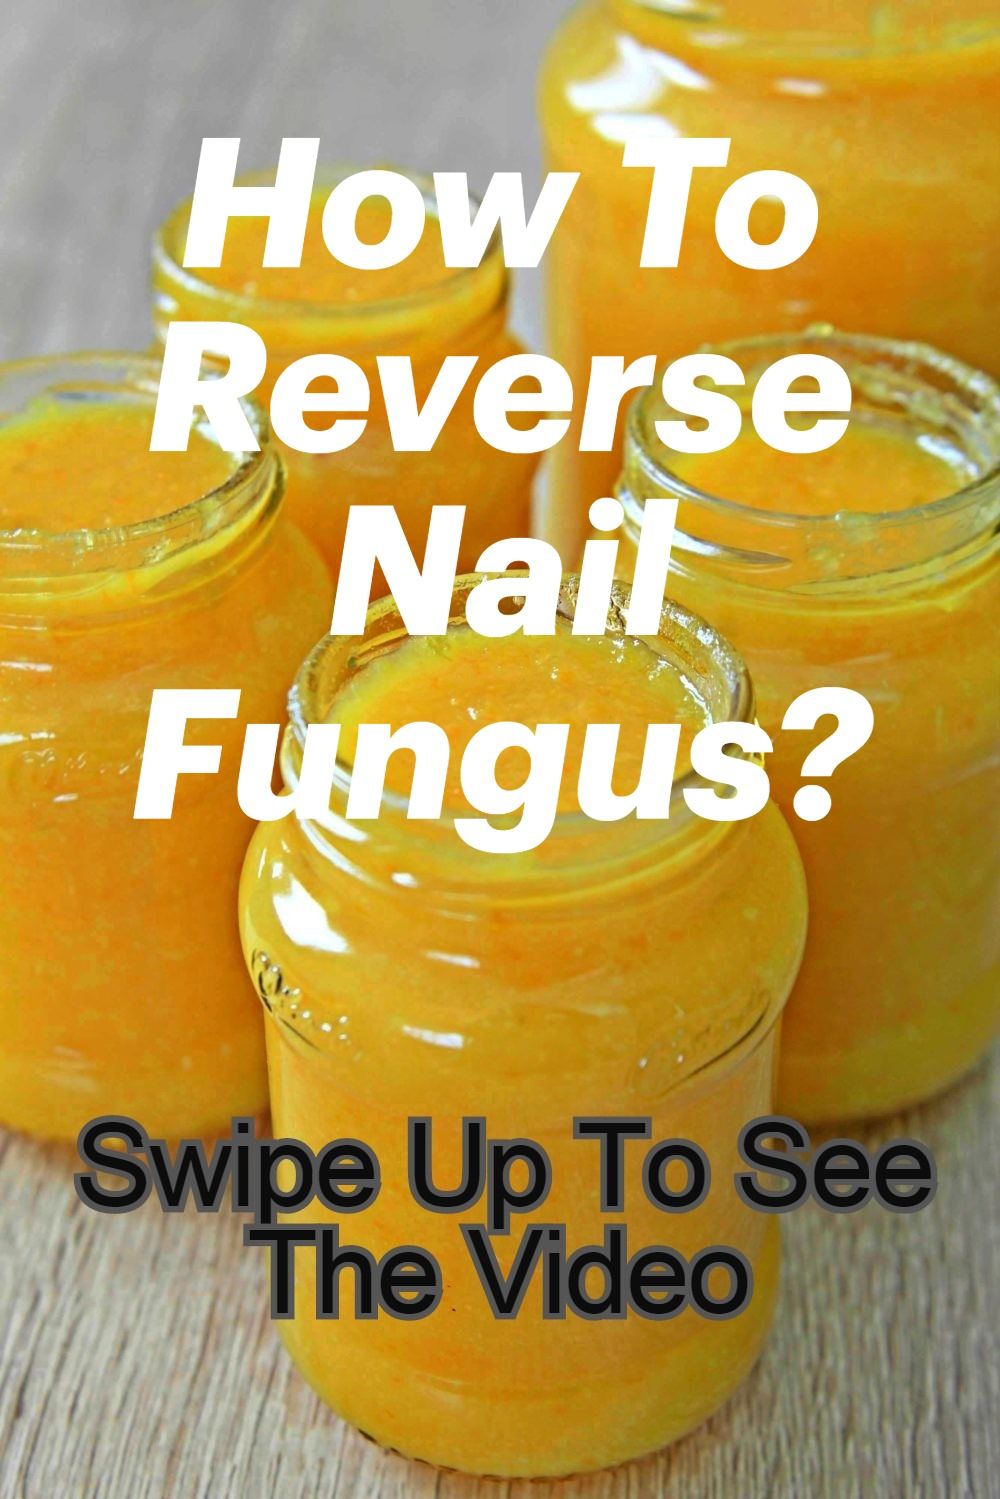 How To Reverse Nail Fungus?